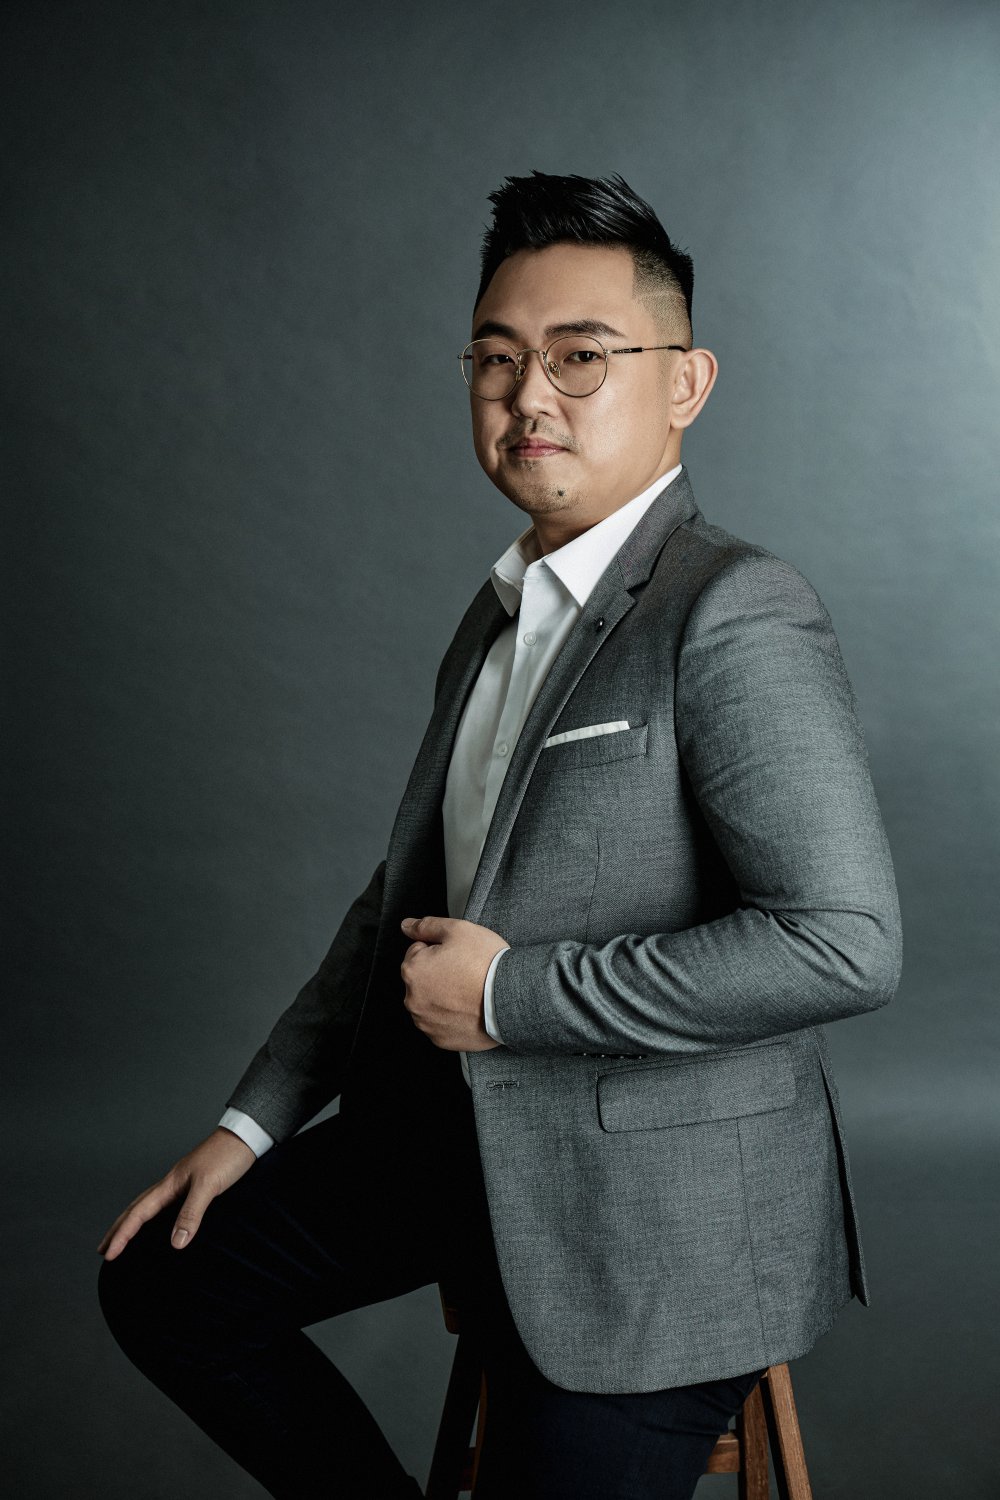 kingssleeve interview Johnny Wong founder of breakout suit - Johnny Ong: Success Is Not One’s Alone